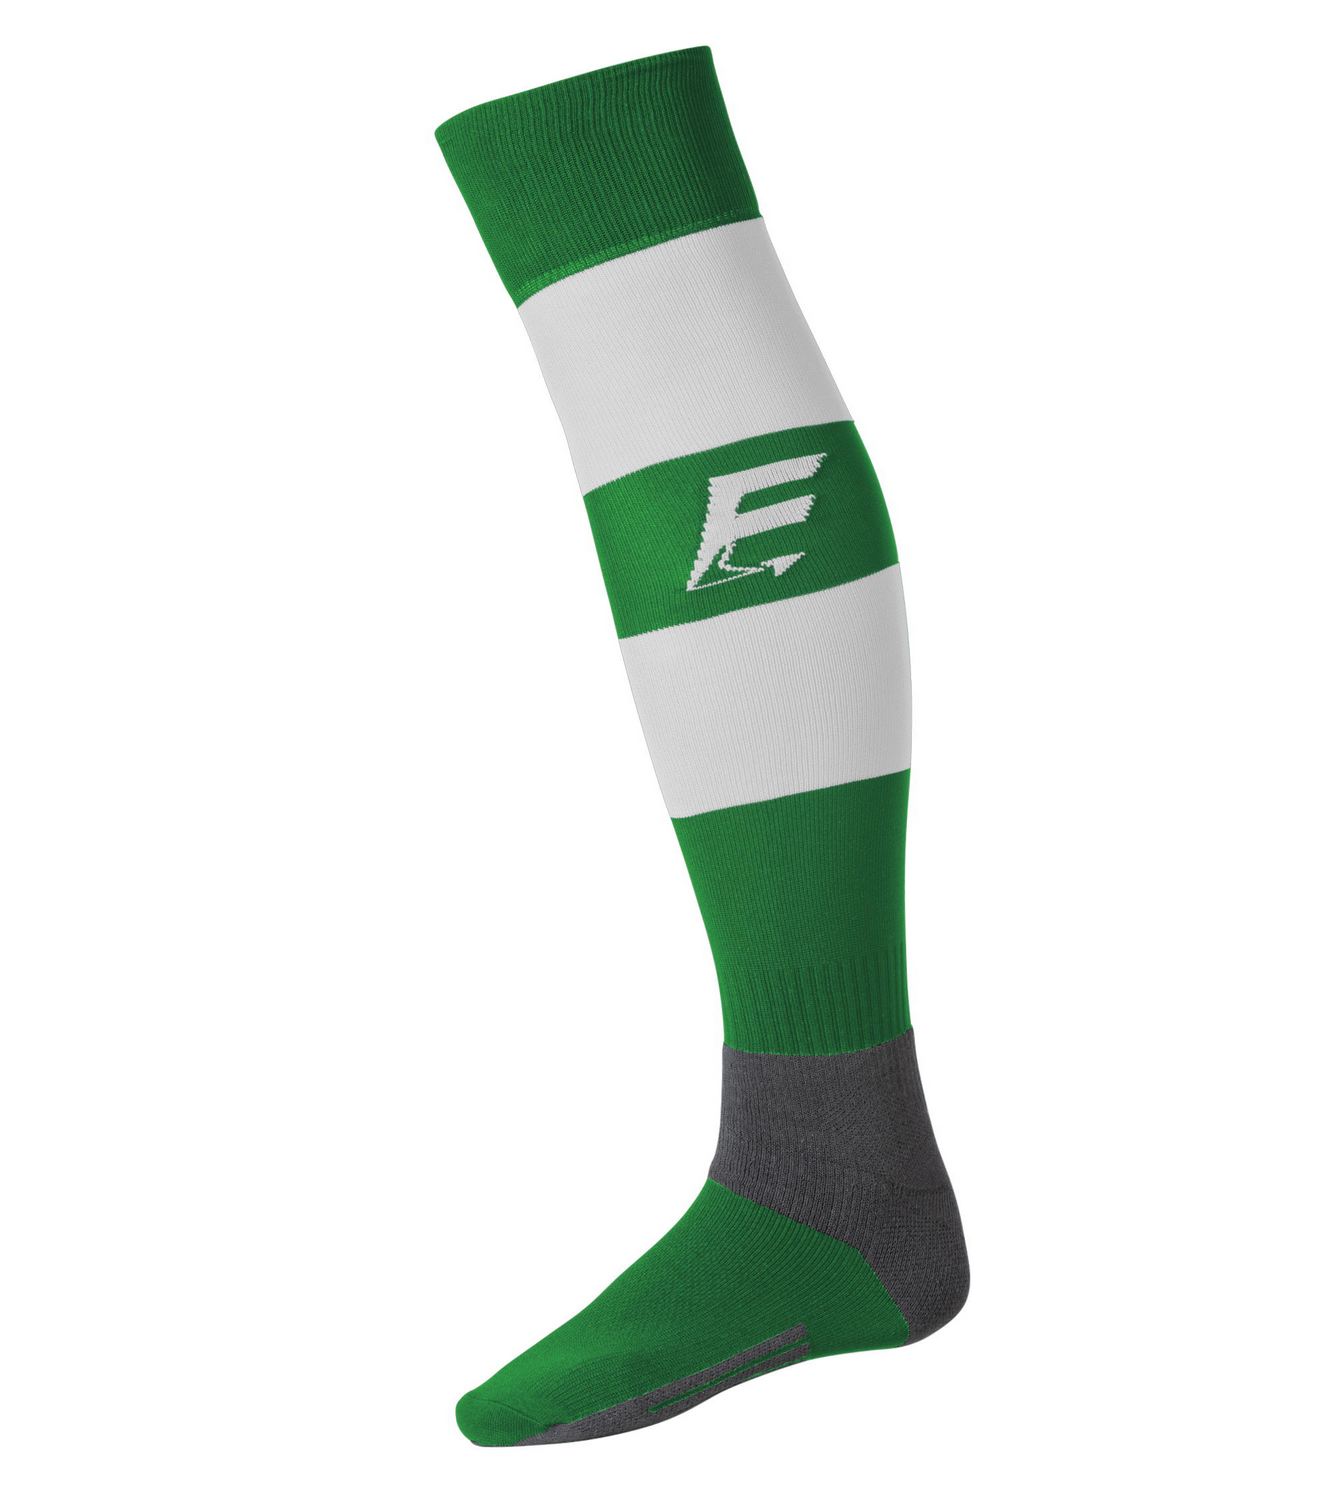 FORCE XV CHAUSSETTES DE RUGBY RAYEES Vert-Blanc